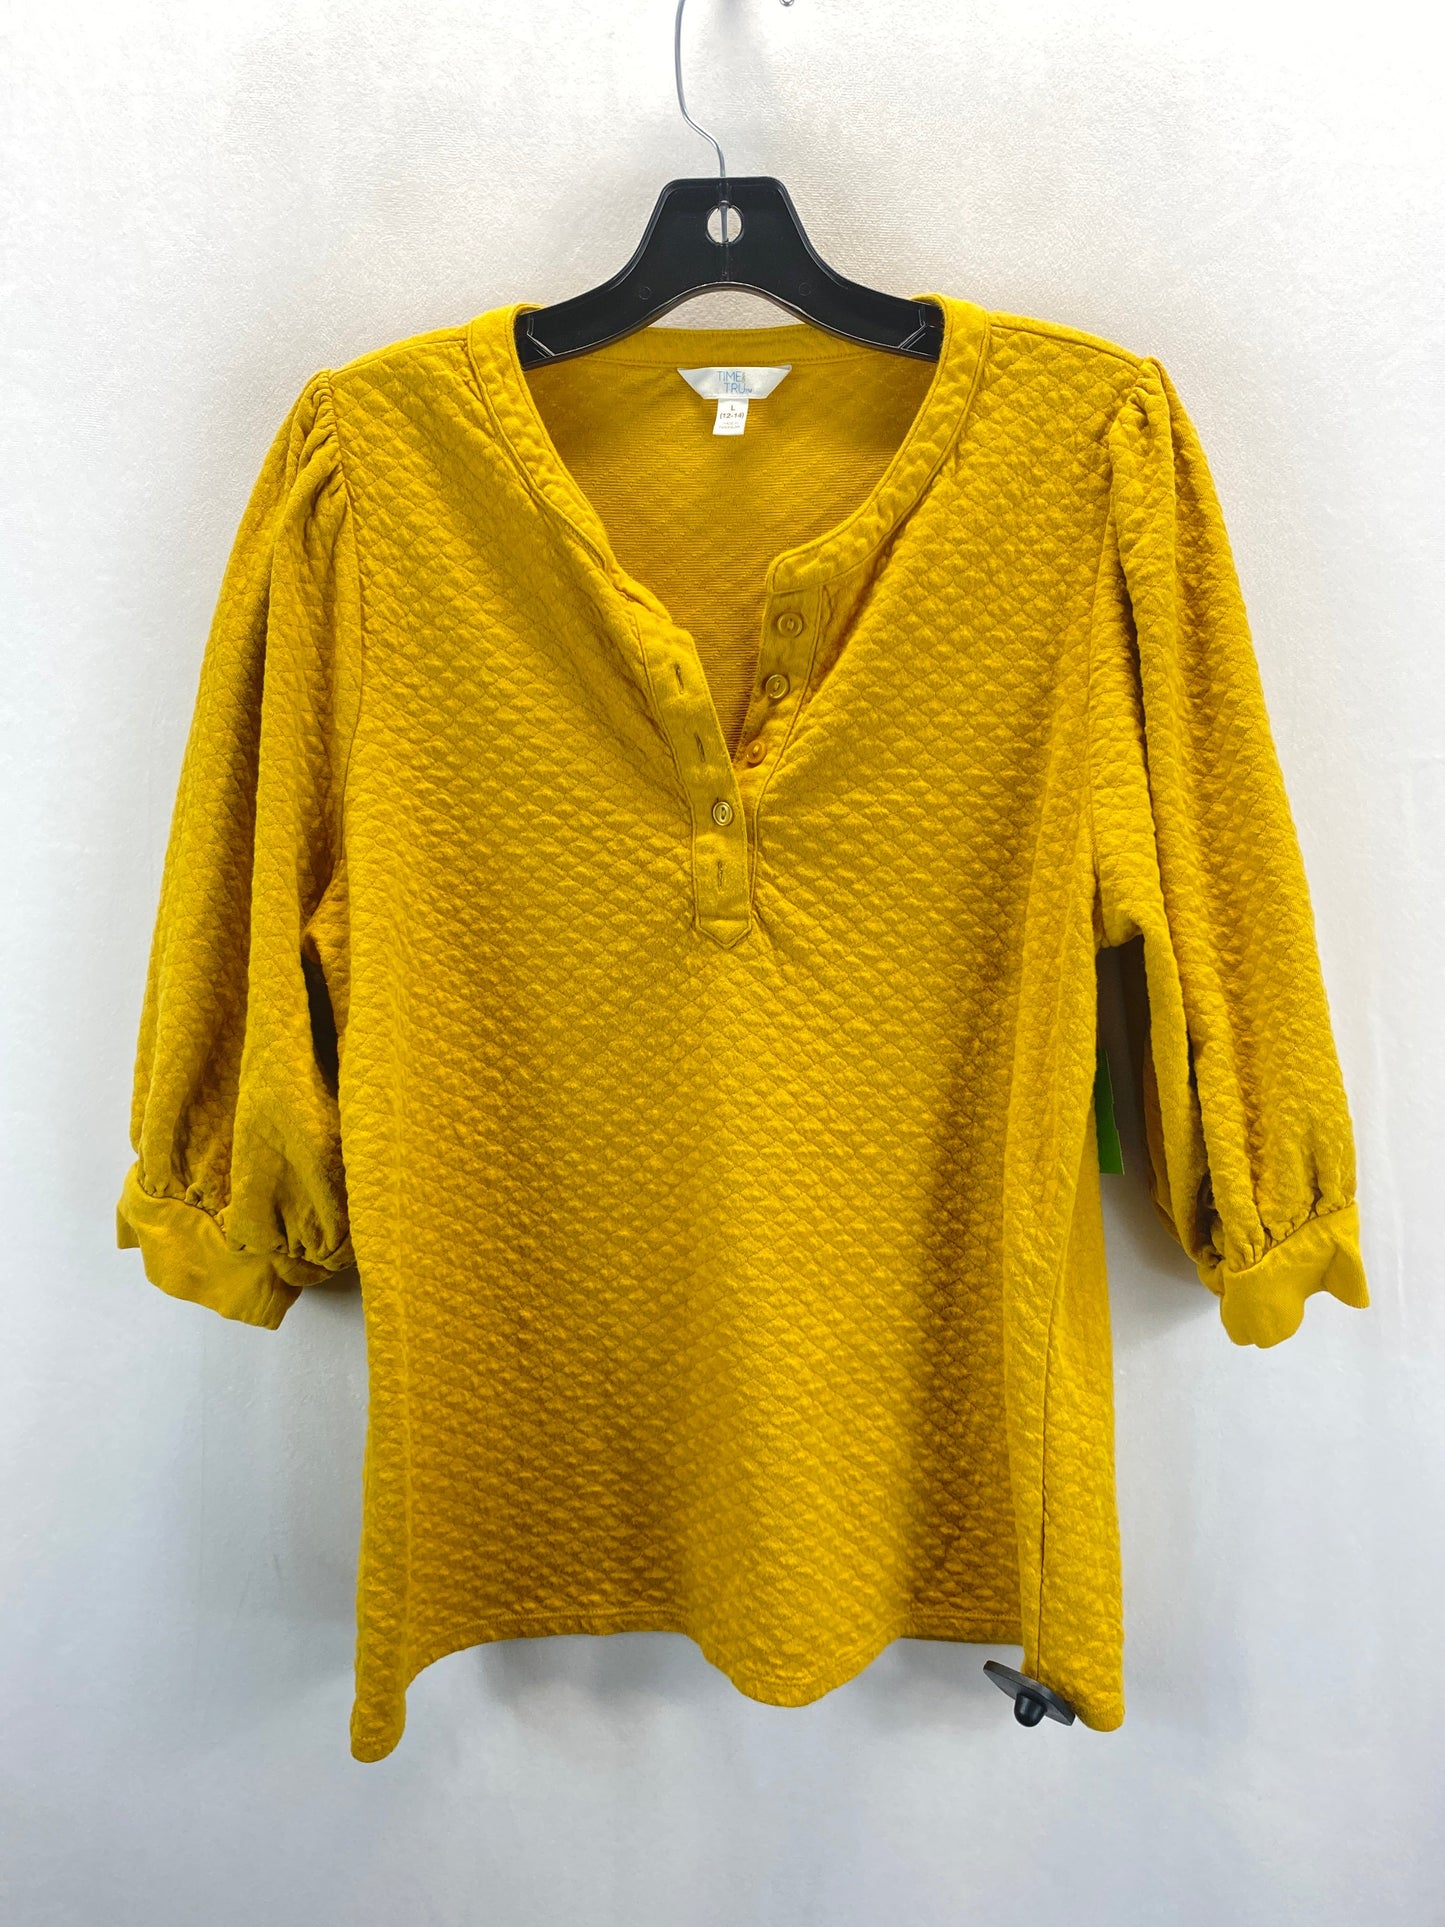 Yellow Top 3/4 Sleeve Time And Tru, Size L